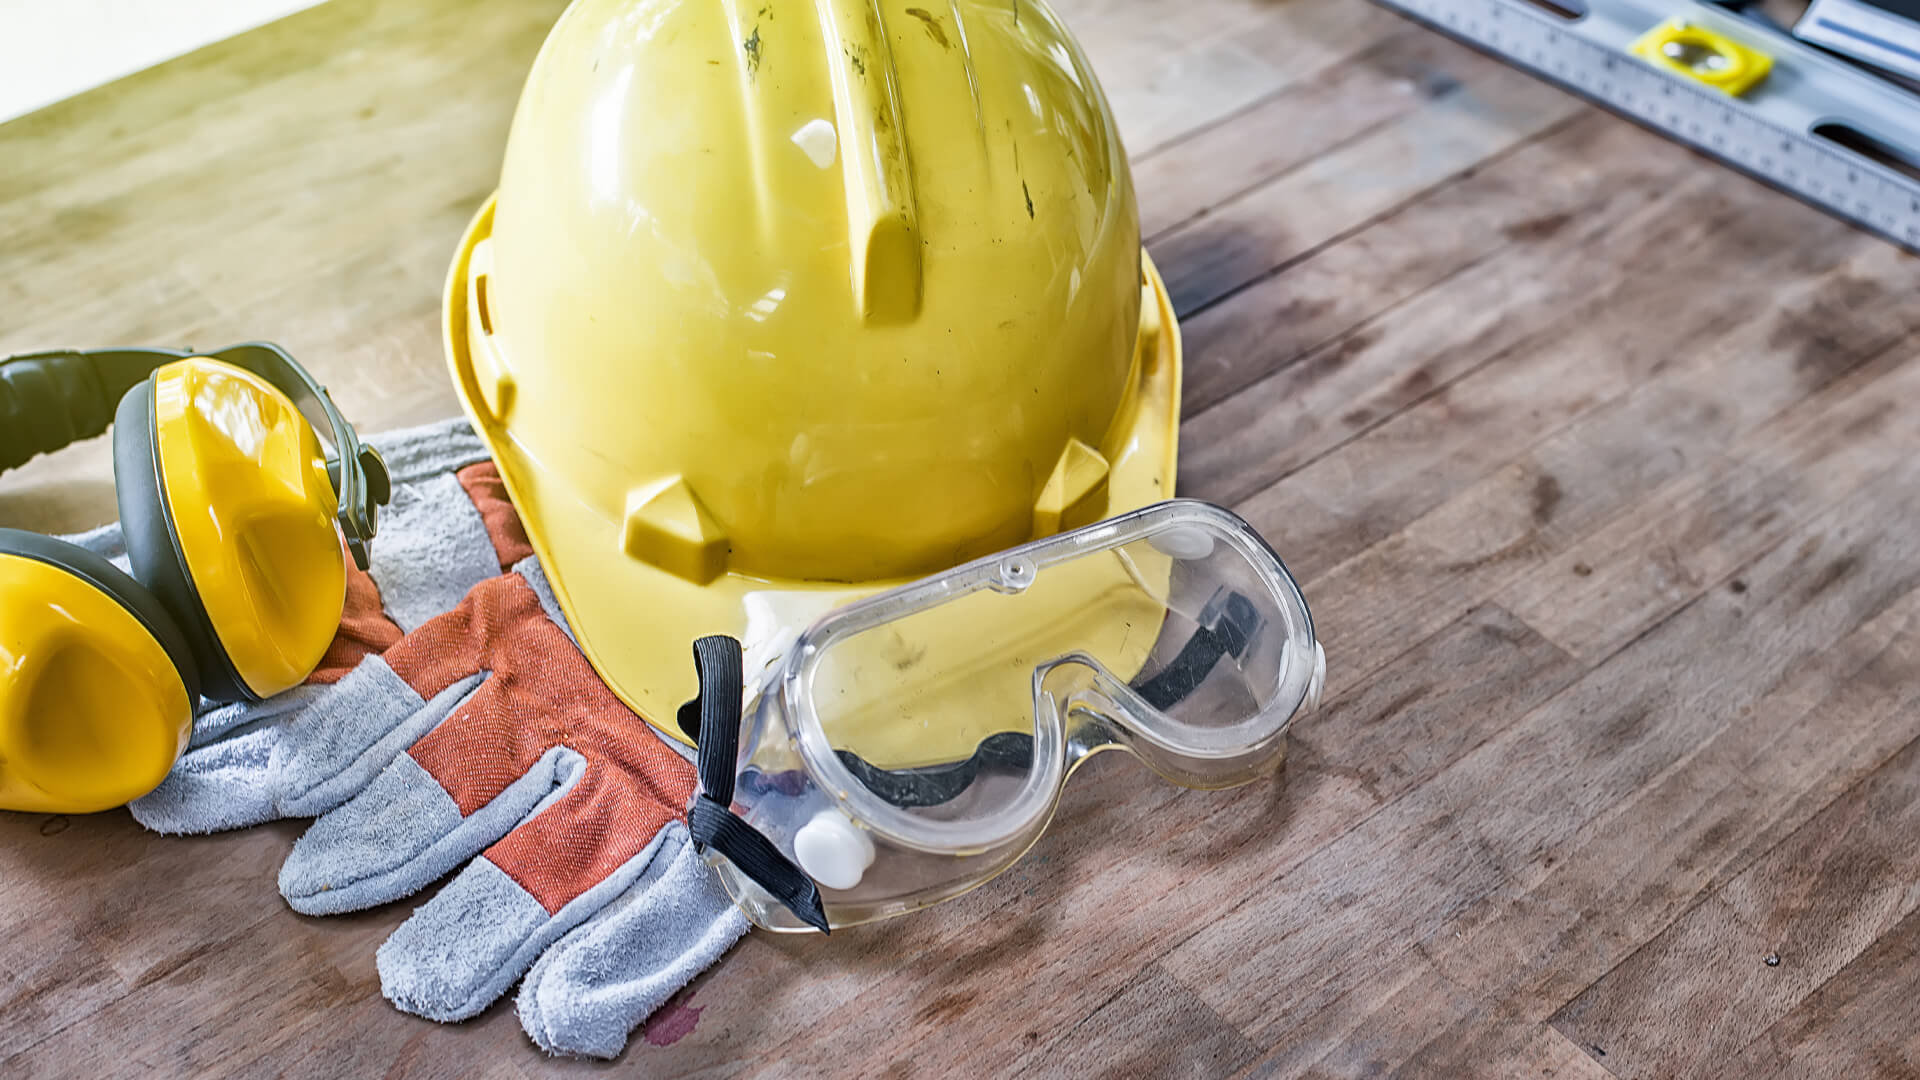 4 Reasons To Wear Protective Gear During Home Improvement - BUILD